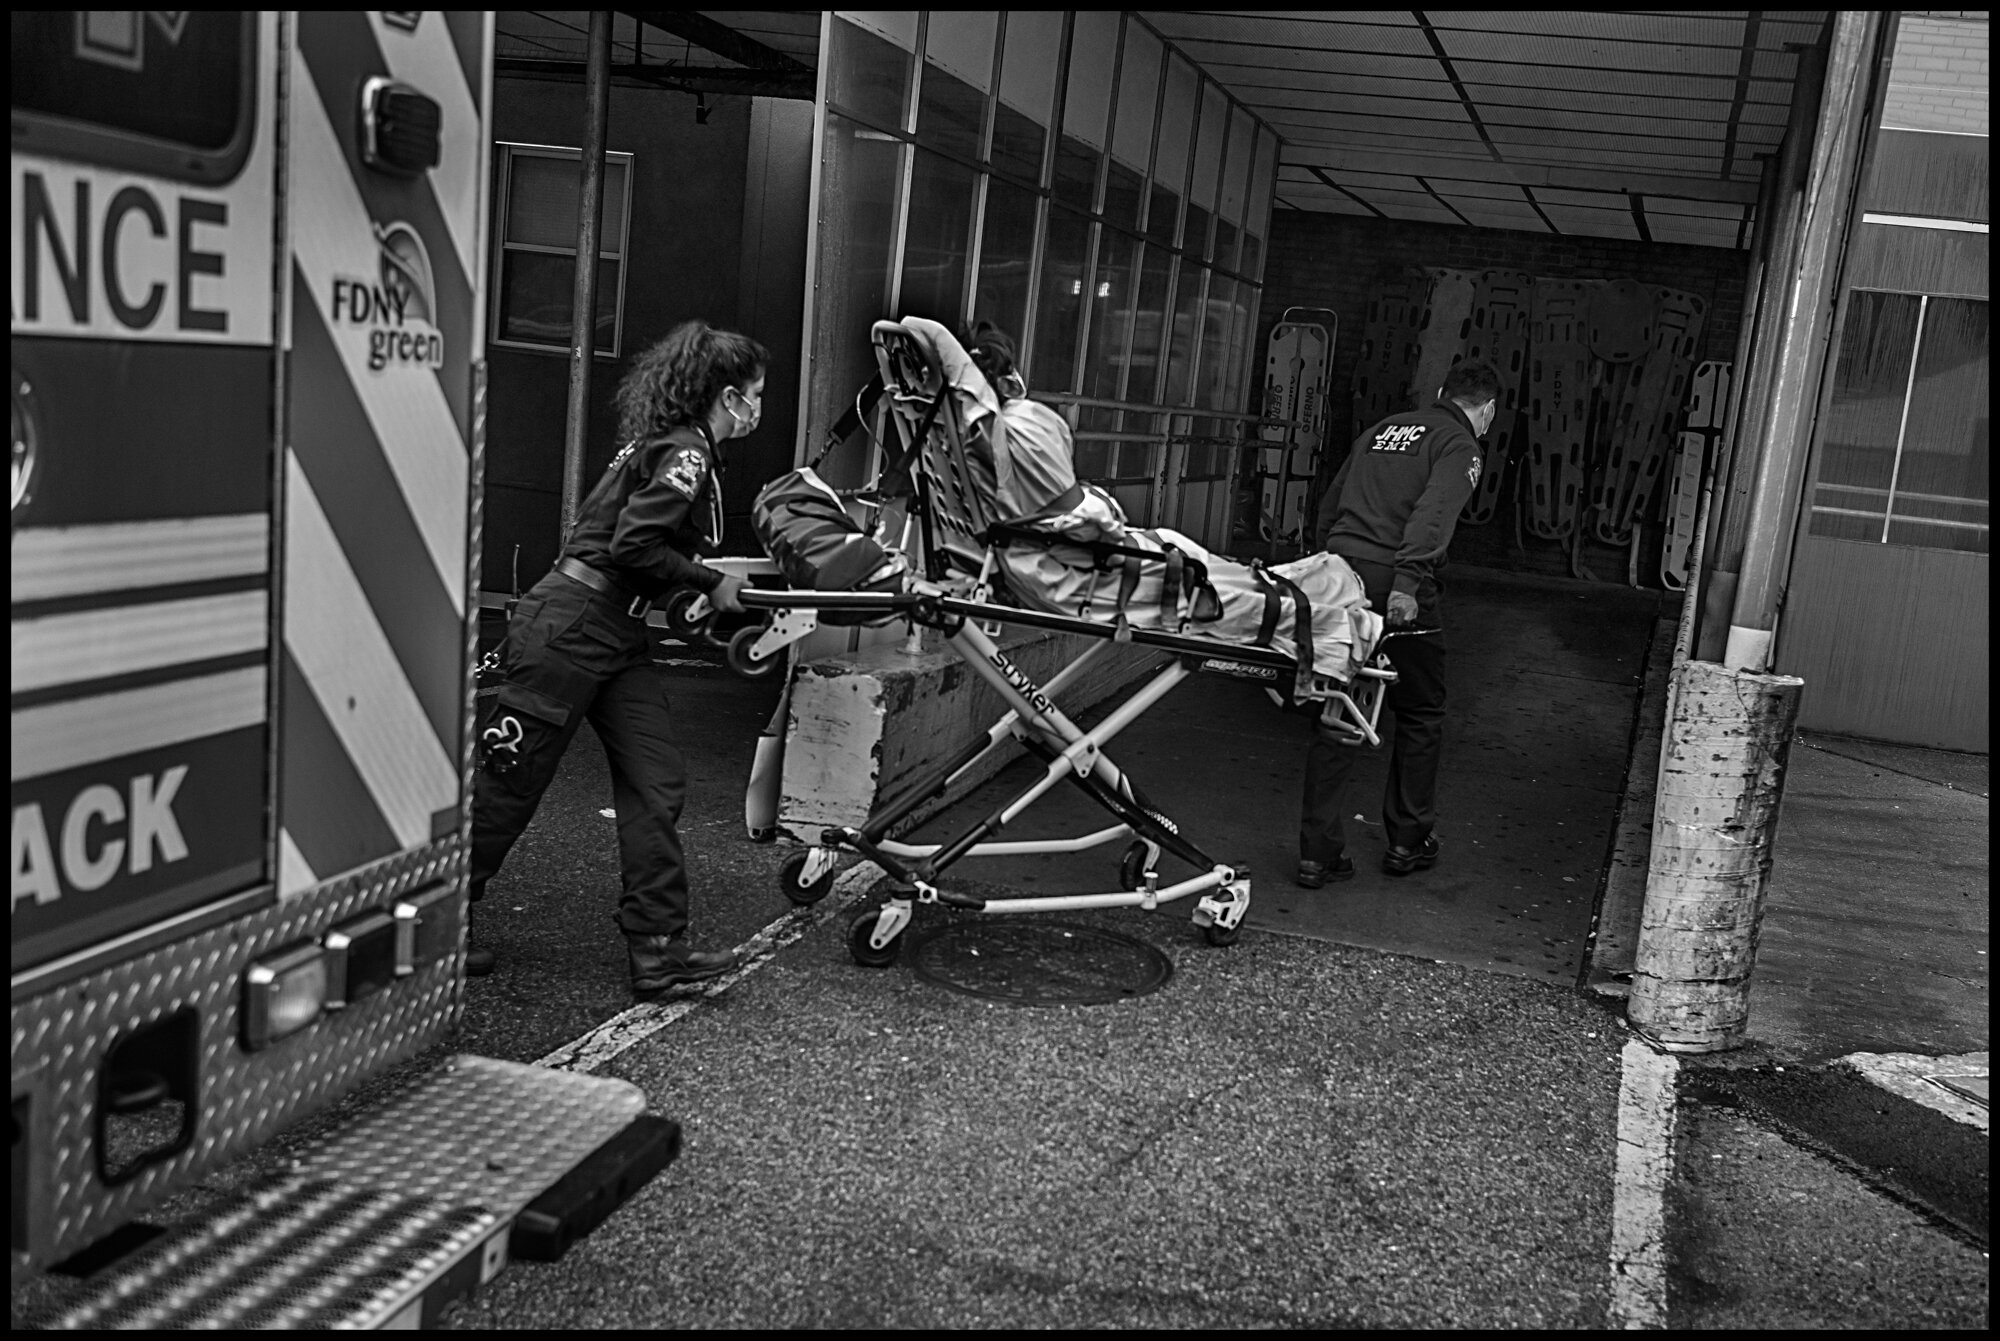  Ambulance workers take a patient into the emergency room at Elmhurst Hospital in Queens.  March 29, 2020. © Peter Turnley  ID# 07-002 